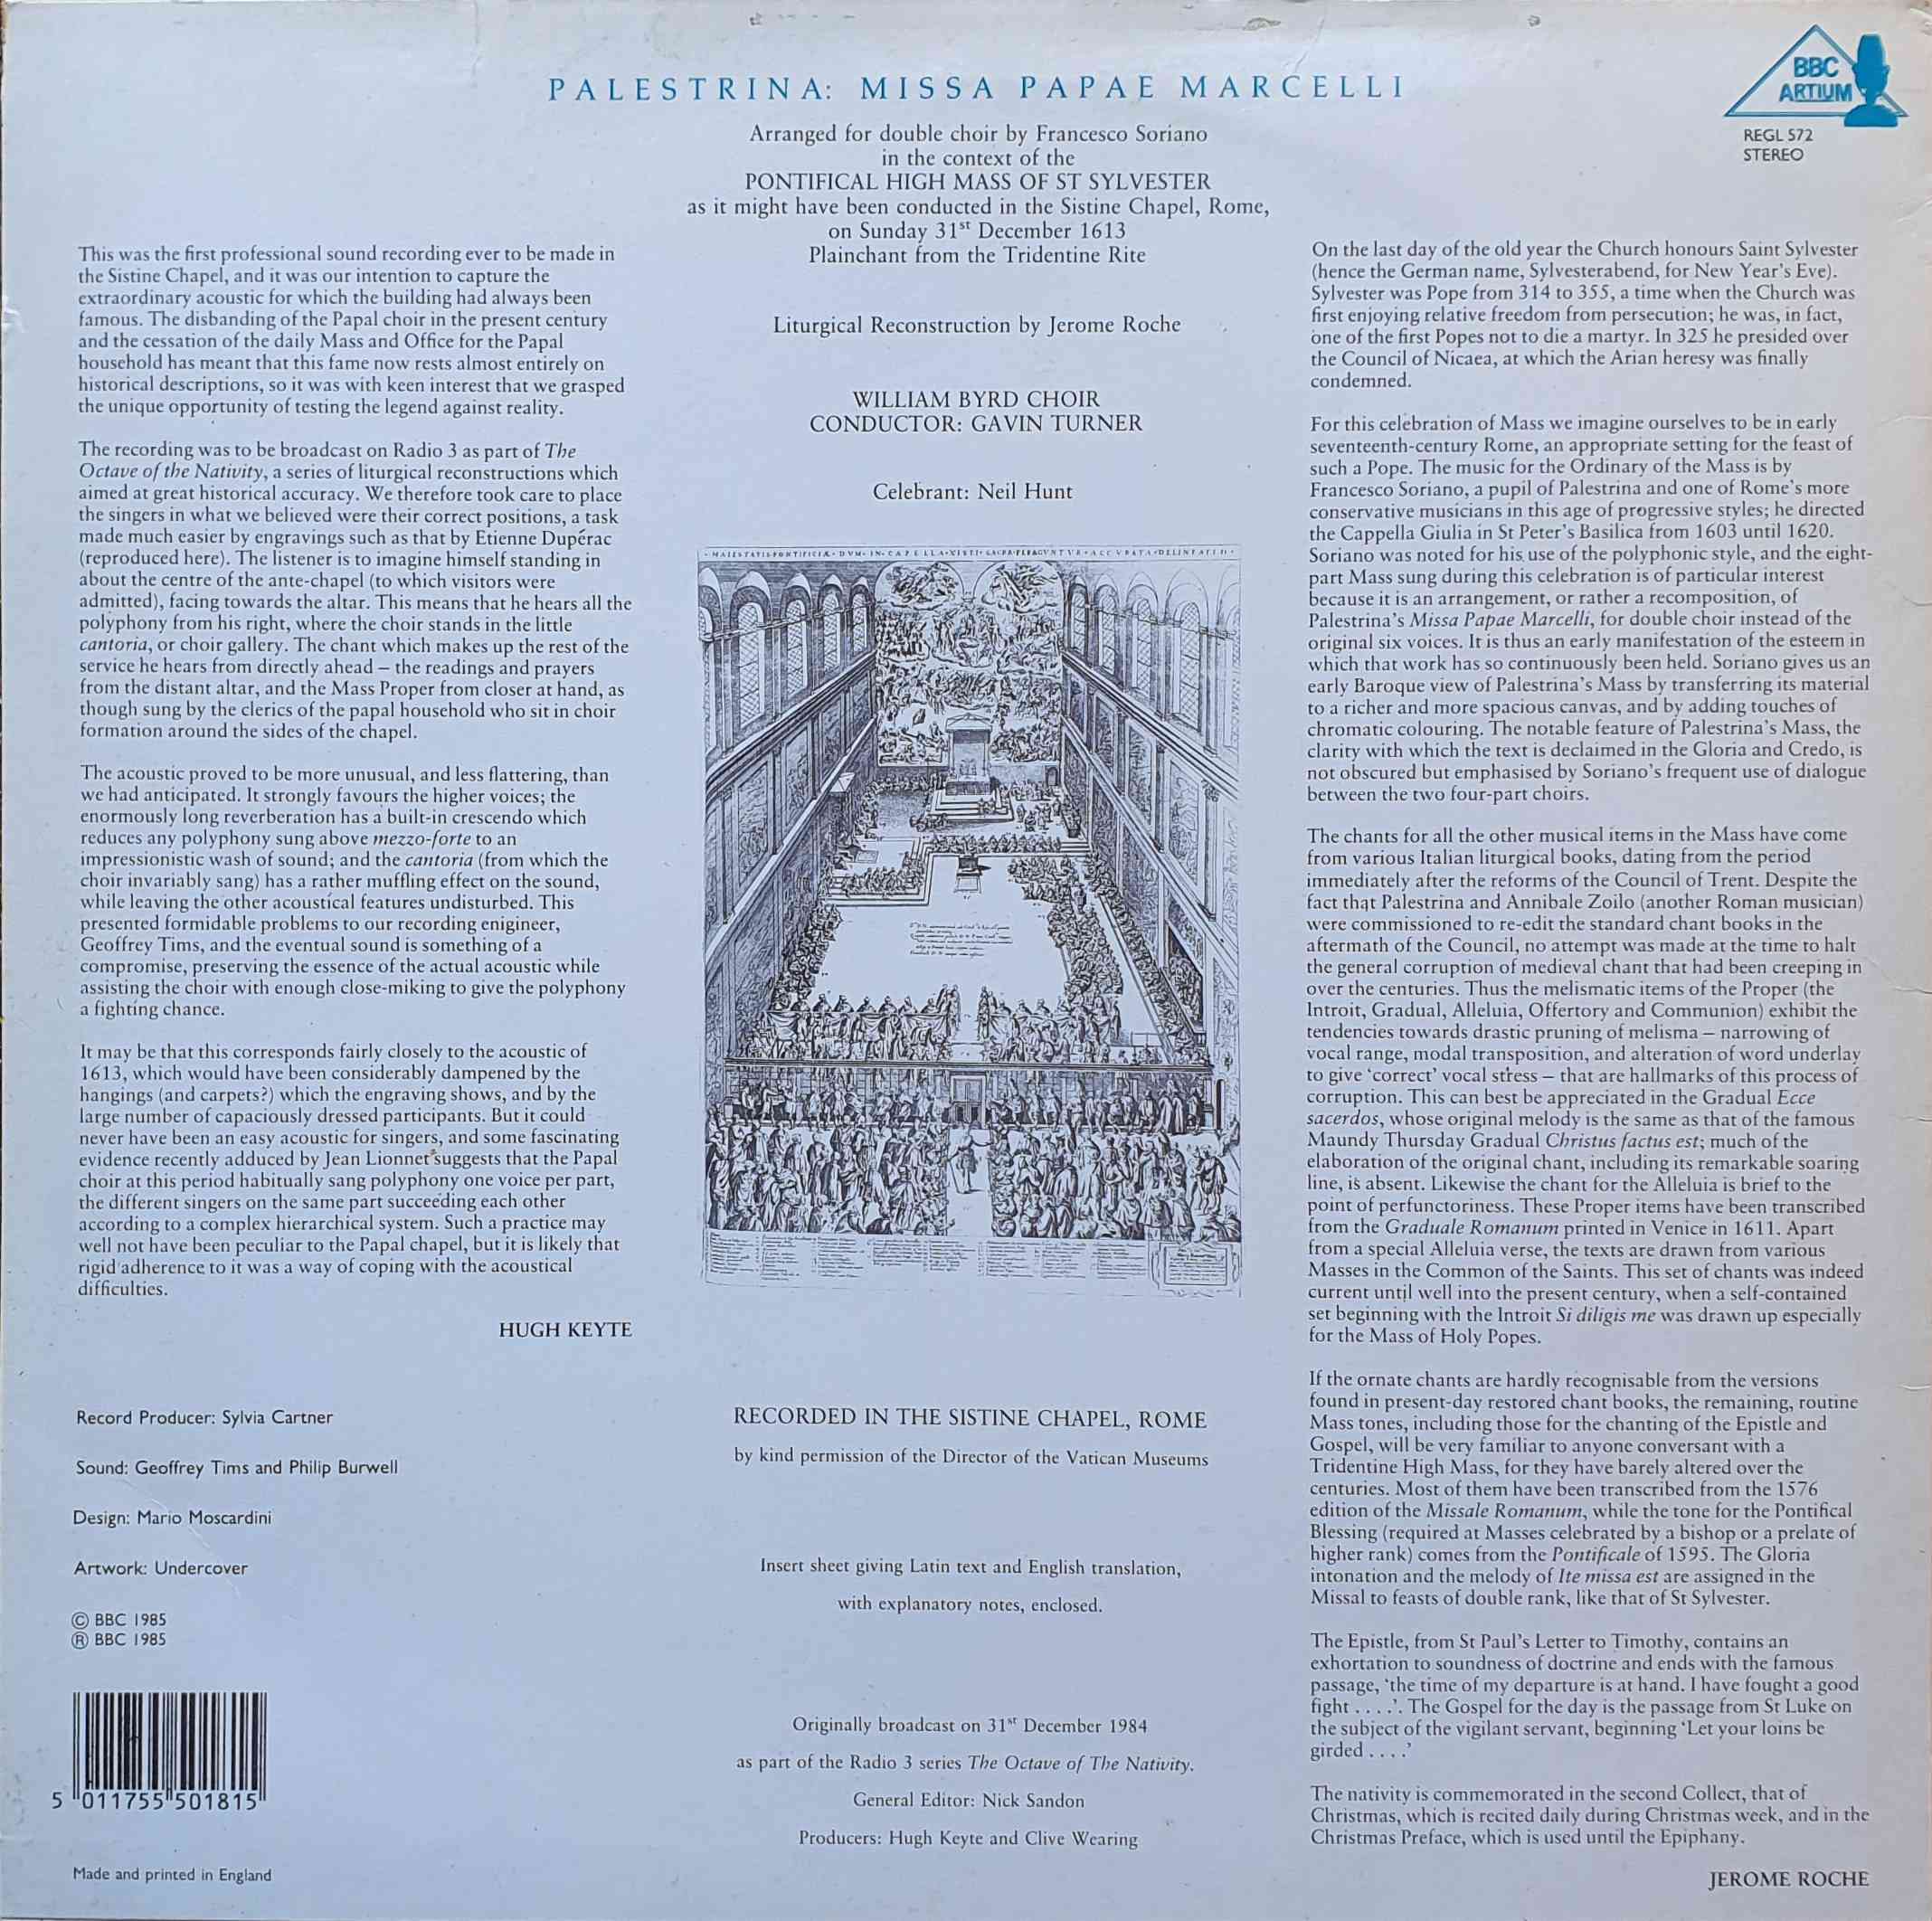 Picture of REGL 572 Mass of St. Sylvester by artist Arr. Francesco Soriano from the BBC records and Tapes library